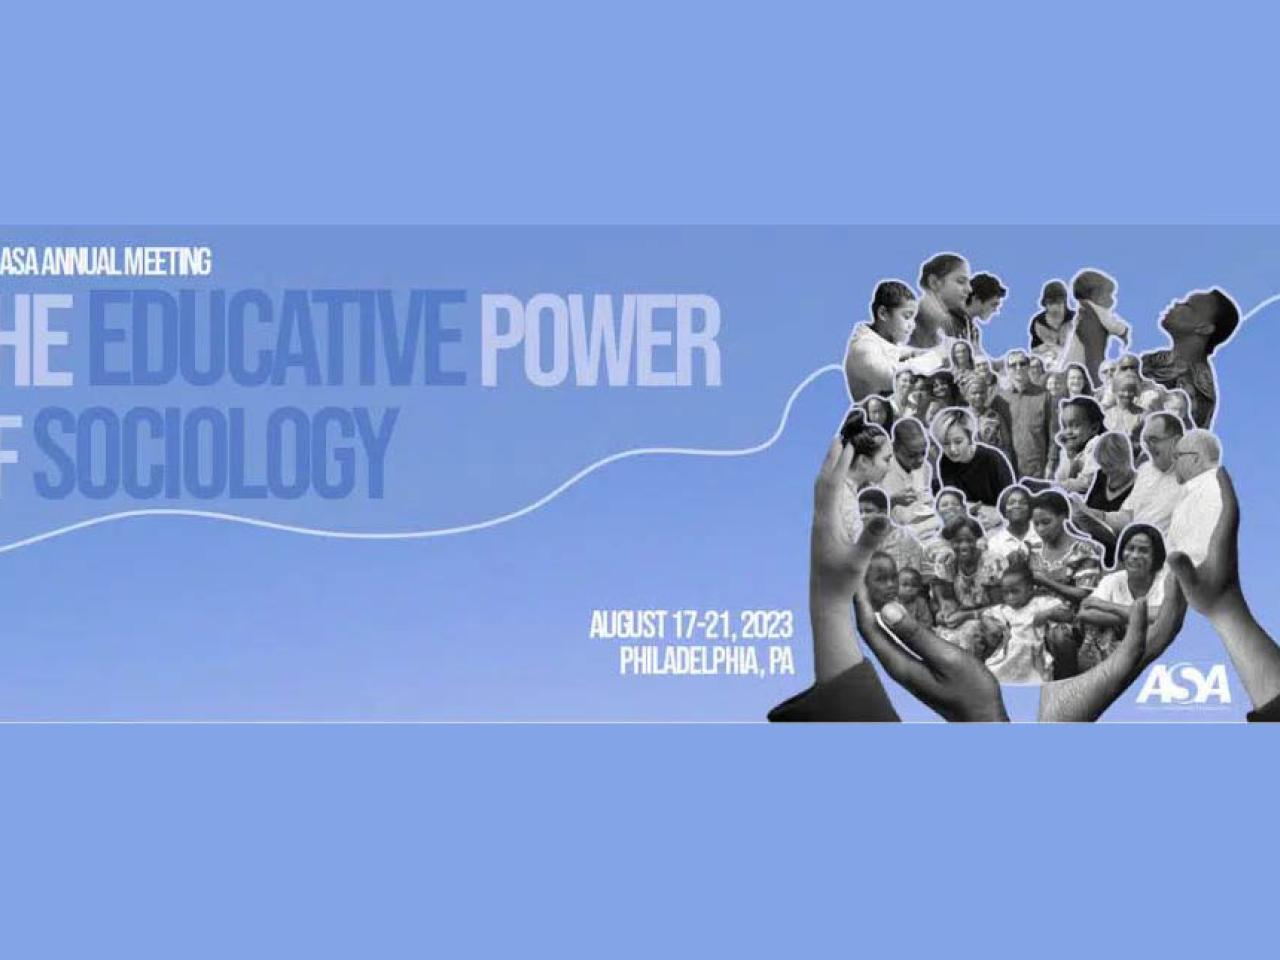 Blue banner with the words "The Educative Power of Sociology"